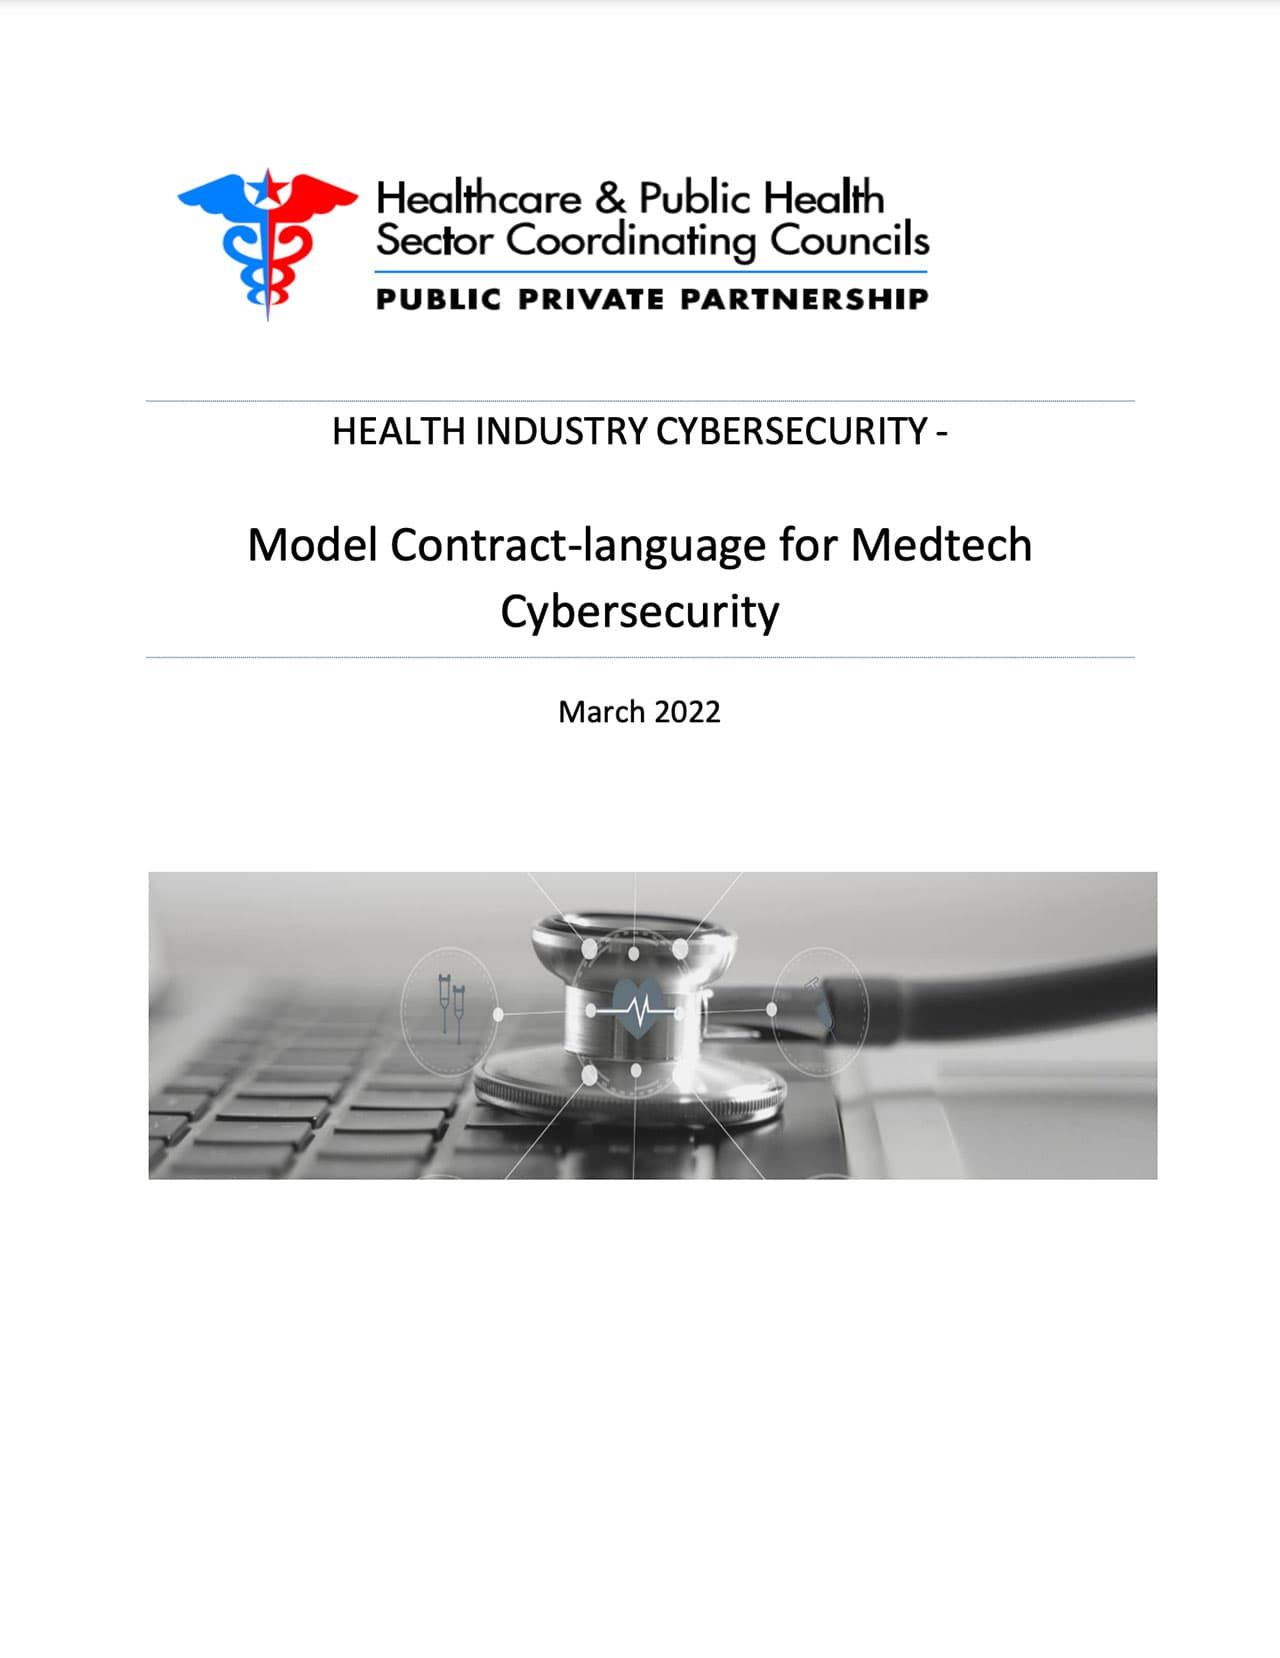 HSCC Model Contract Language For Medtech Cybersecurity 2022